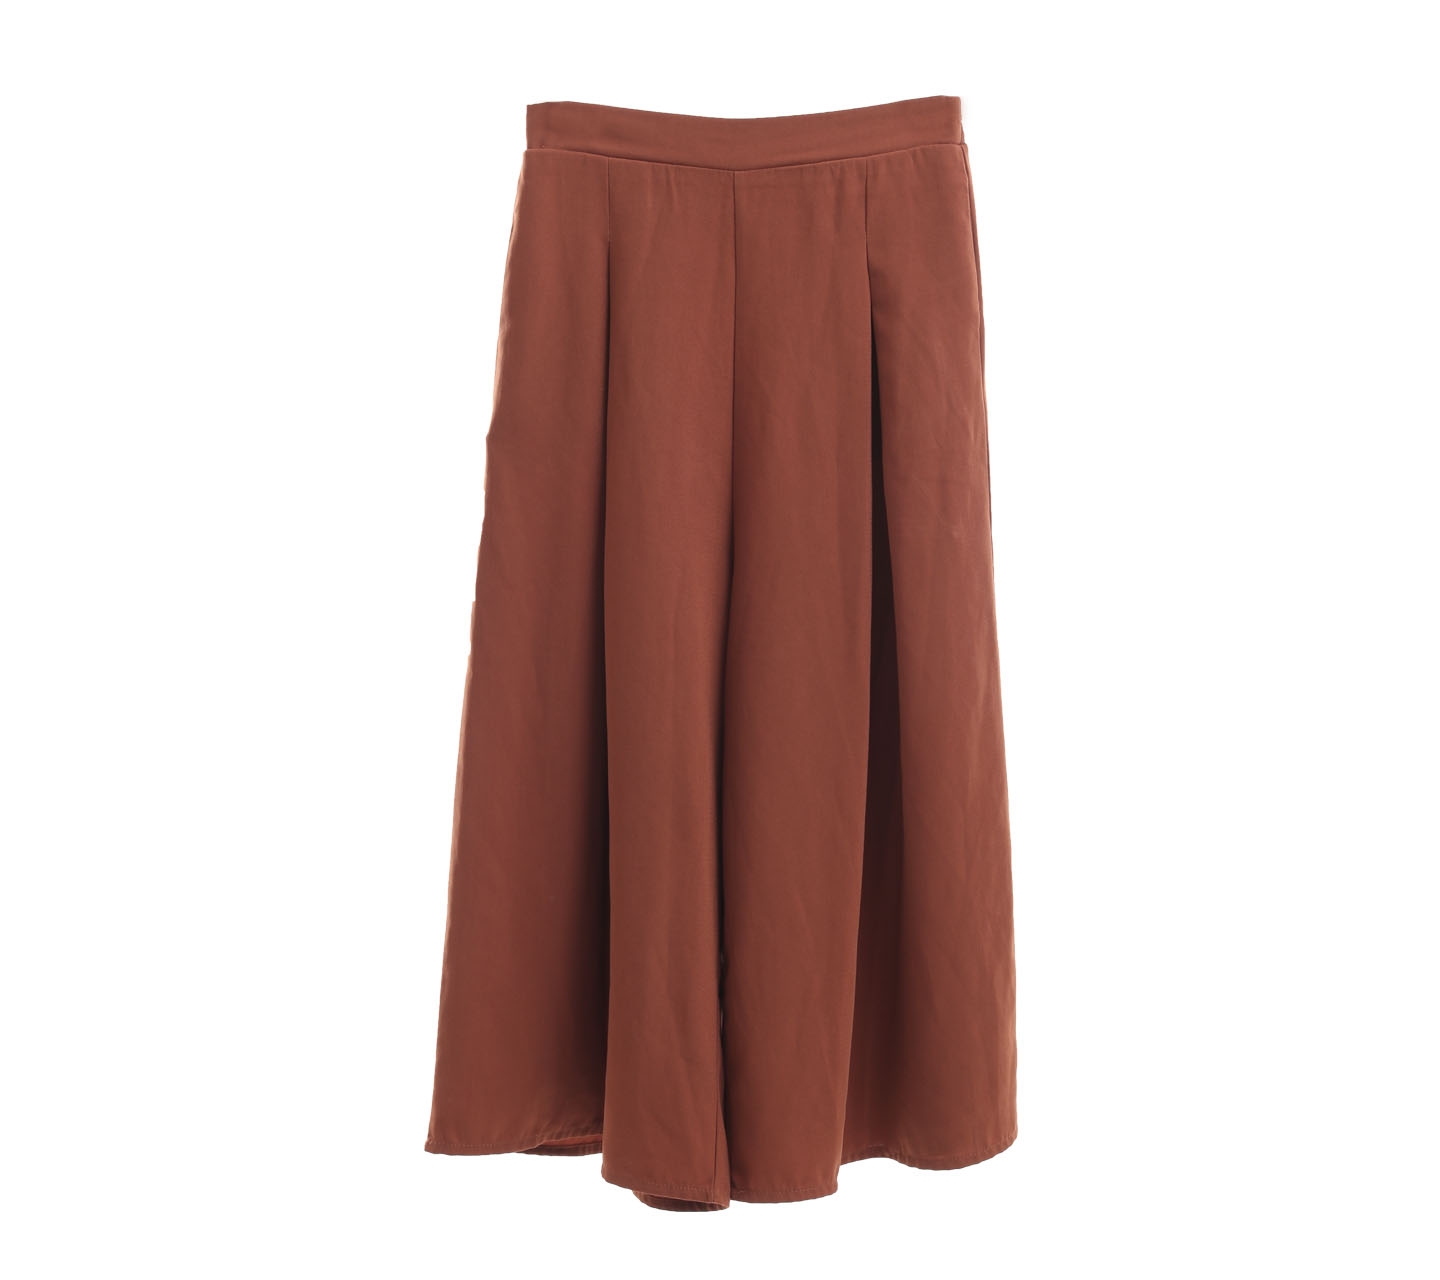 This Is April Brown Culottes Cropped Pants